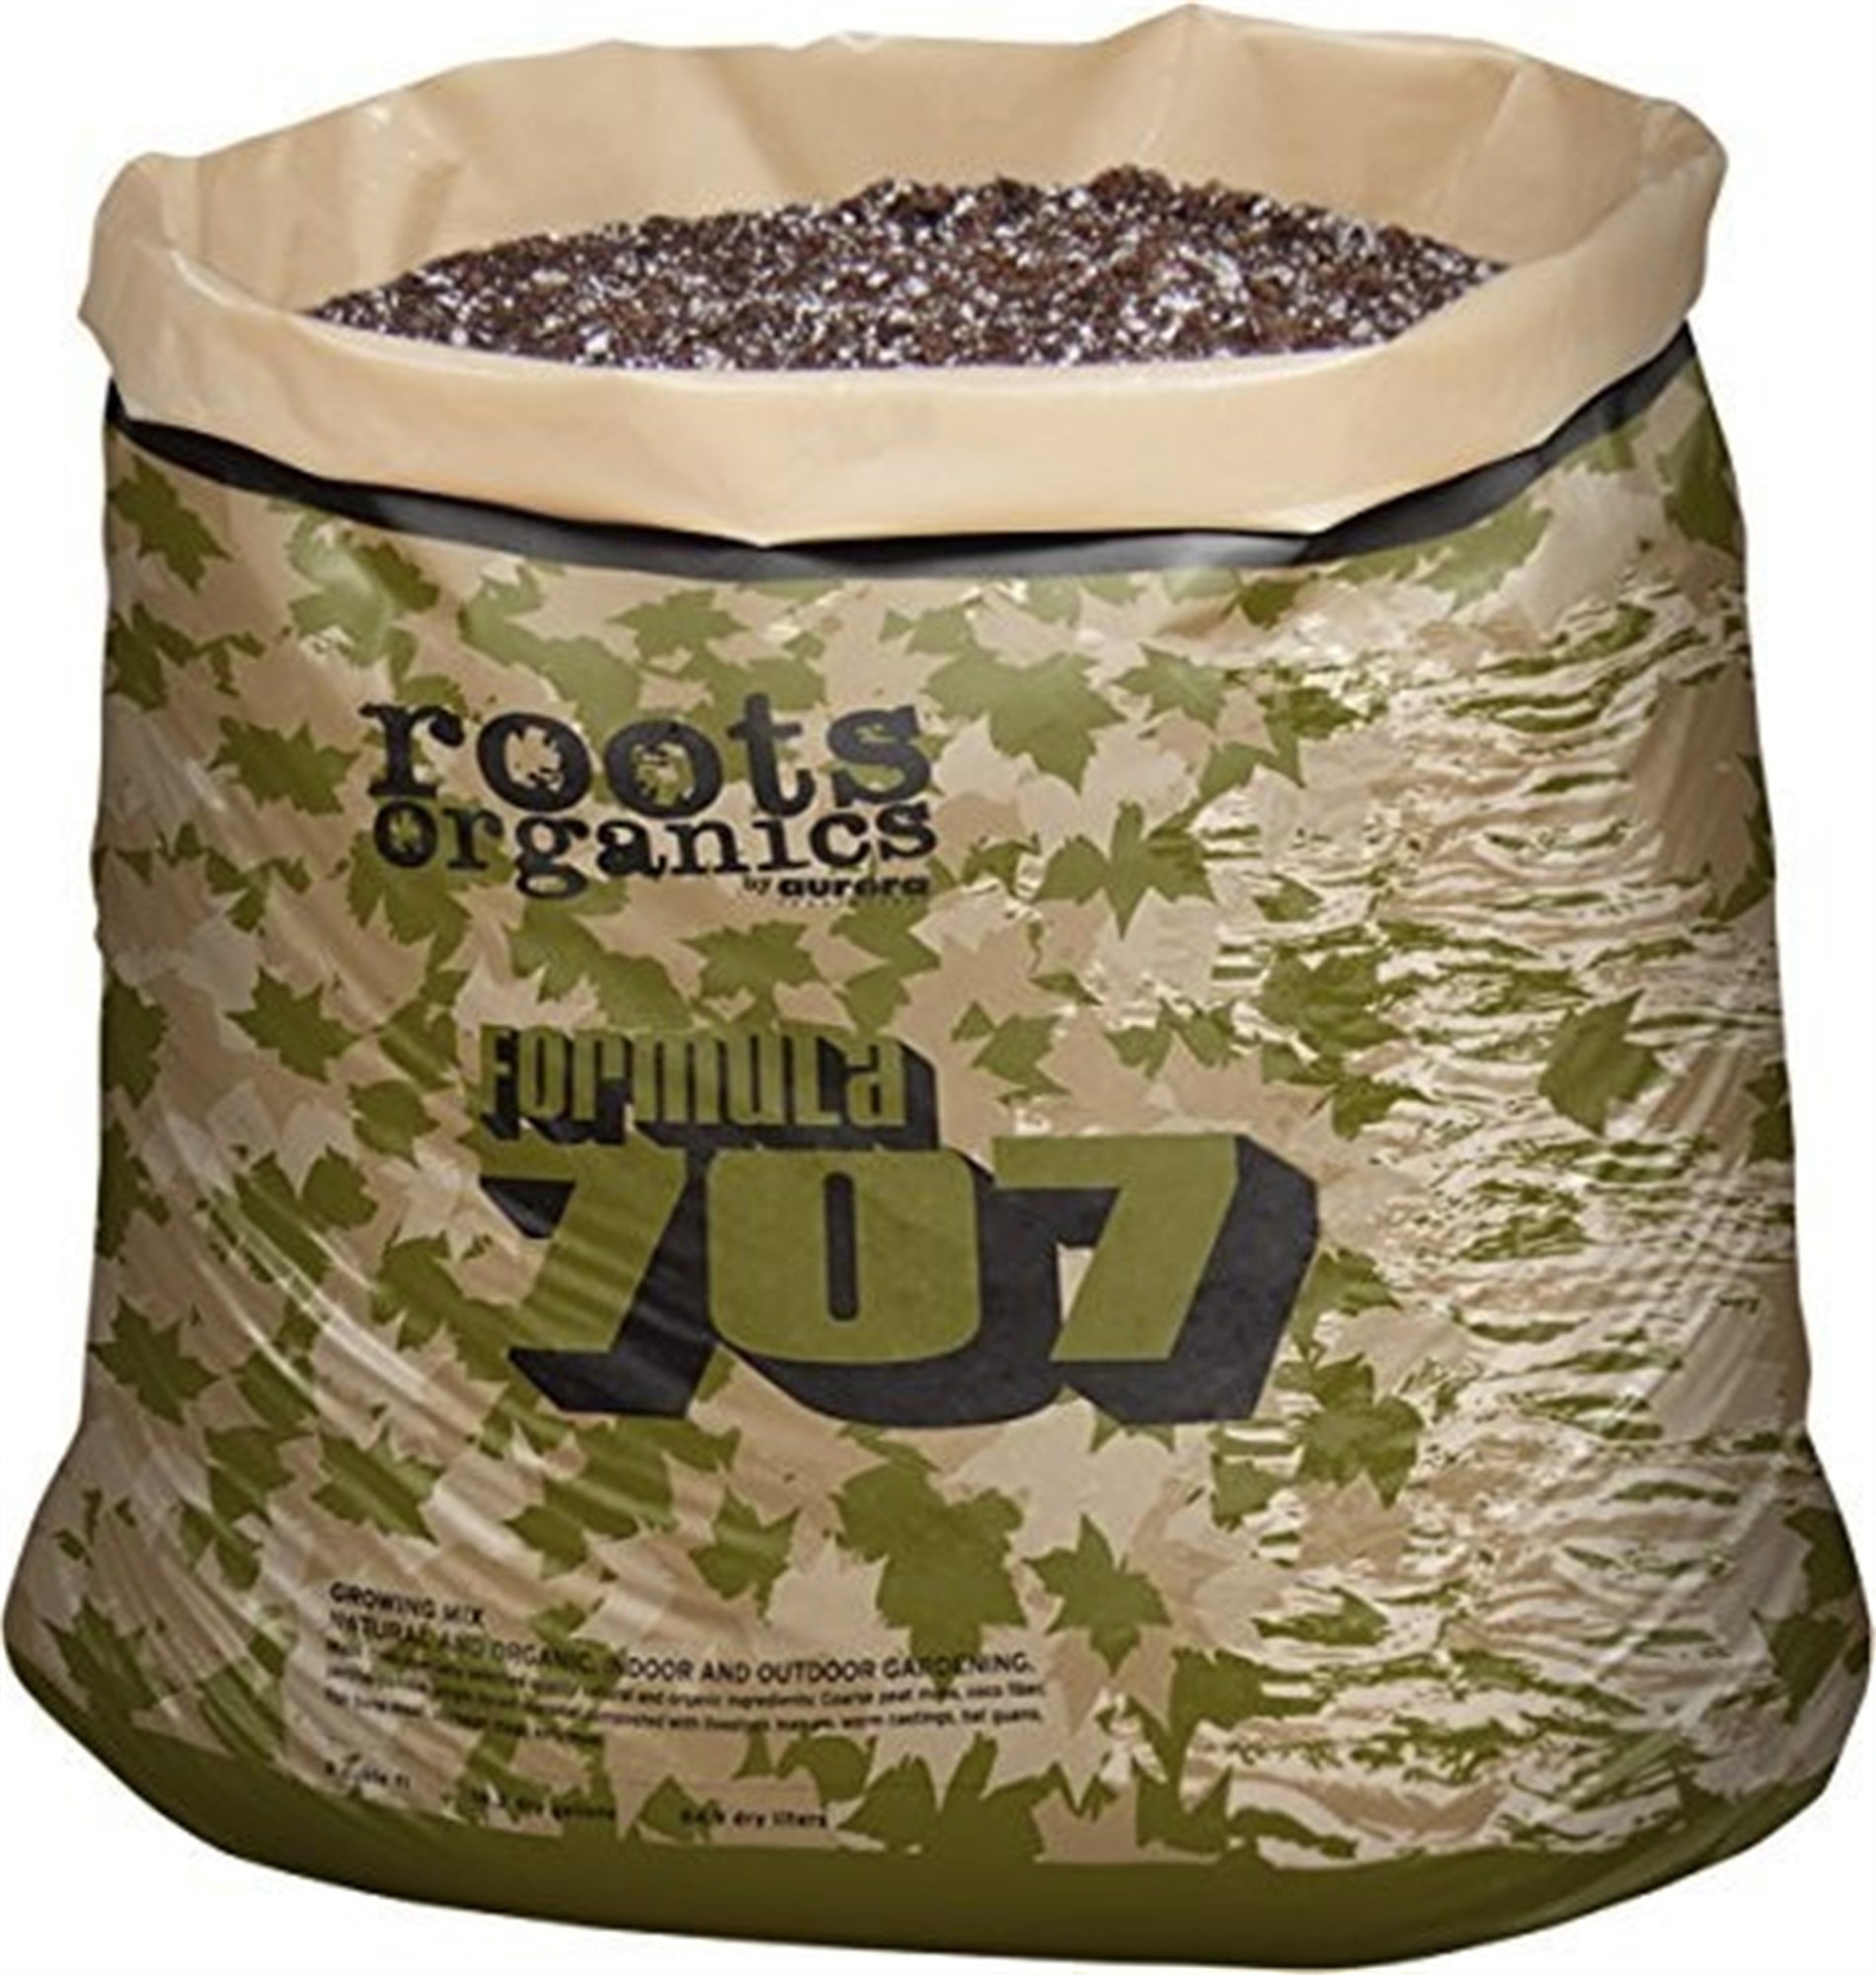 Roots Organic Growing Peat, Compost, Coco Lawn Mix Potting Soil Grow Bag, 3 CF